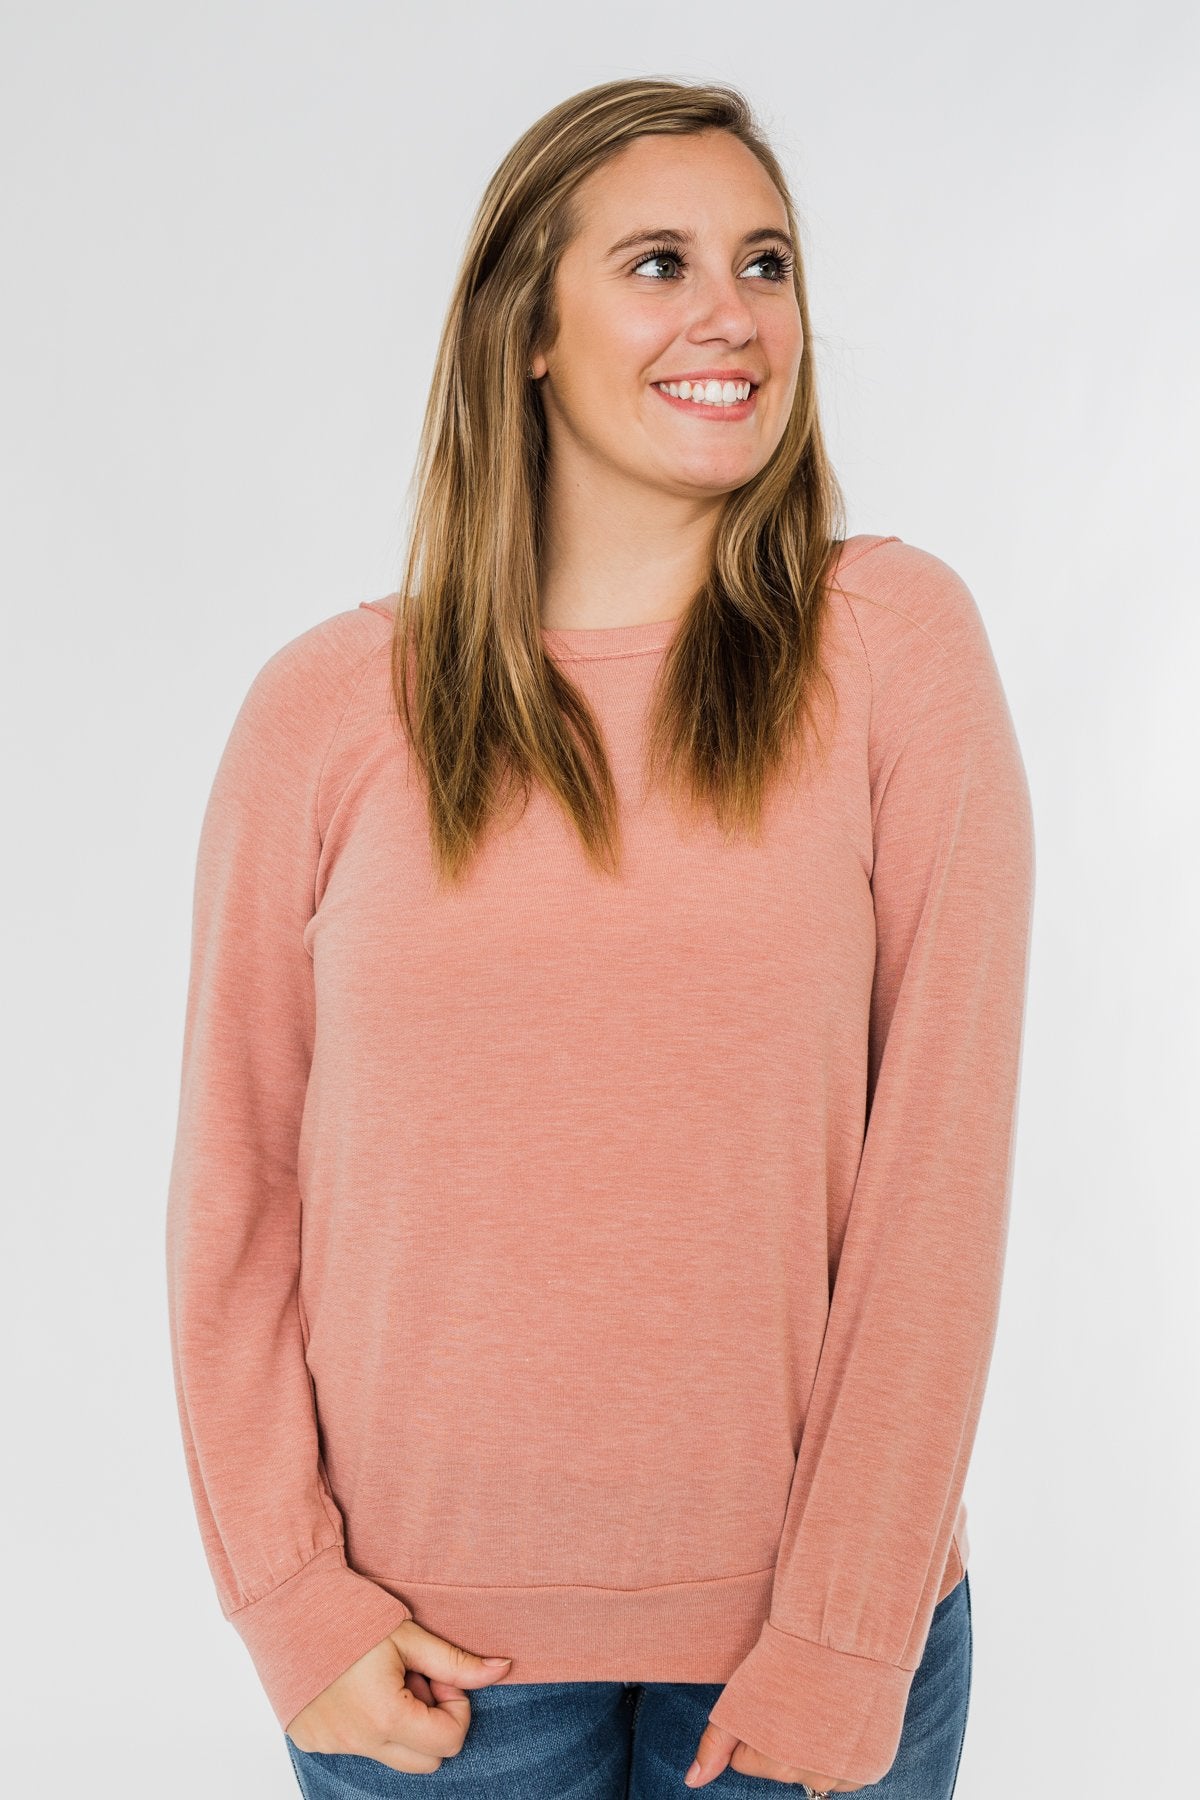 Come Along With Me Pullover Top- Peach